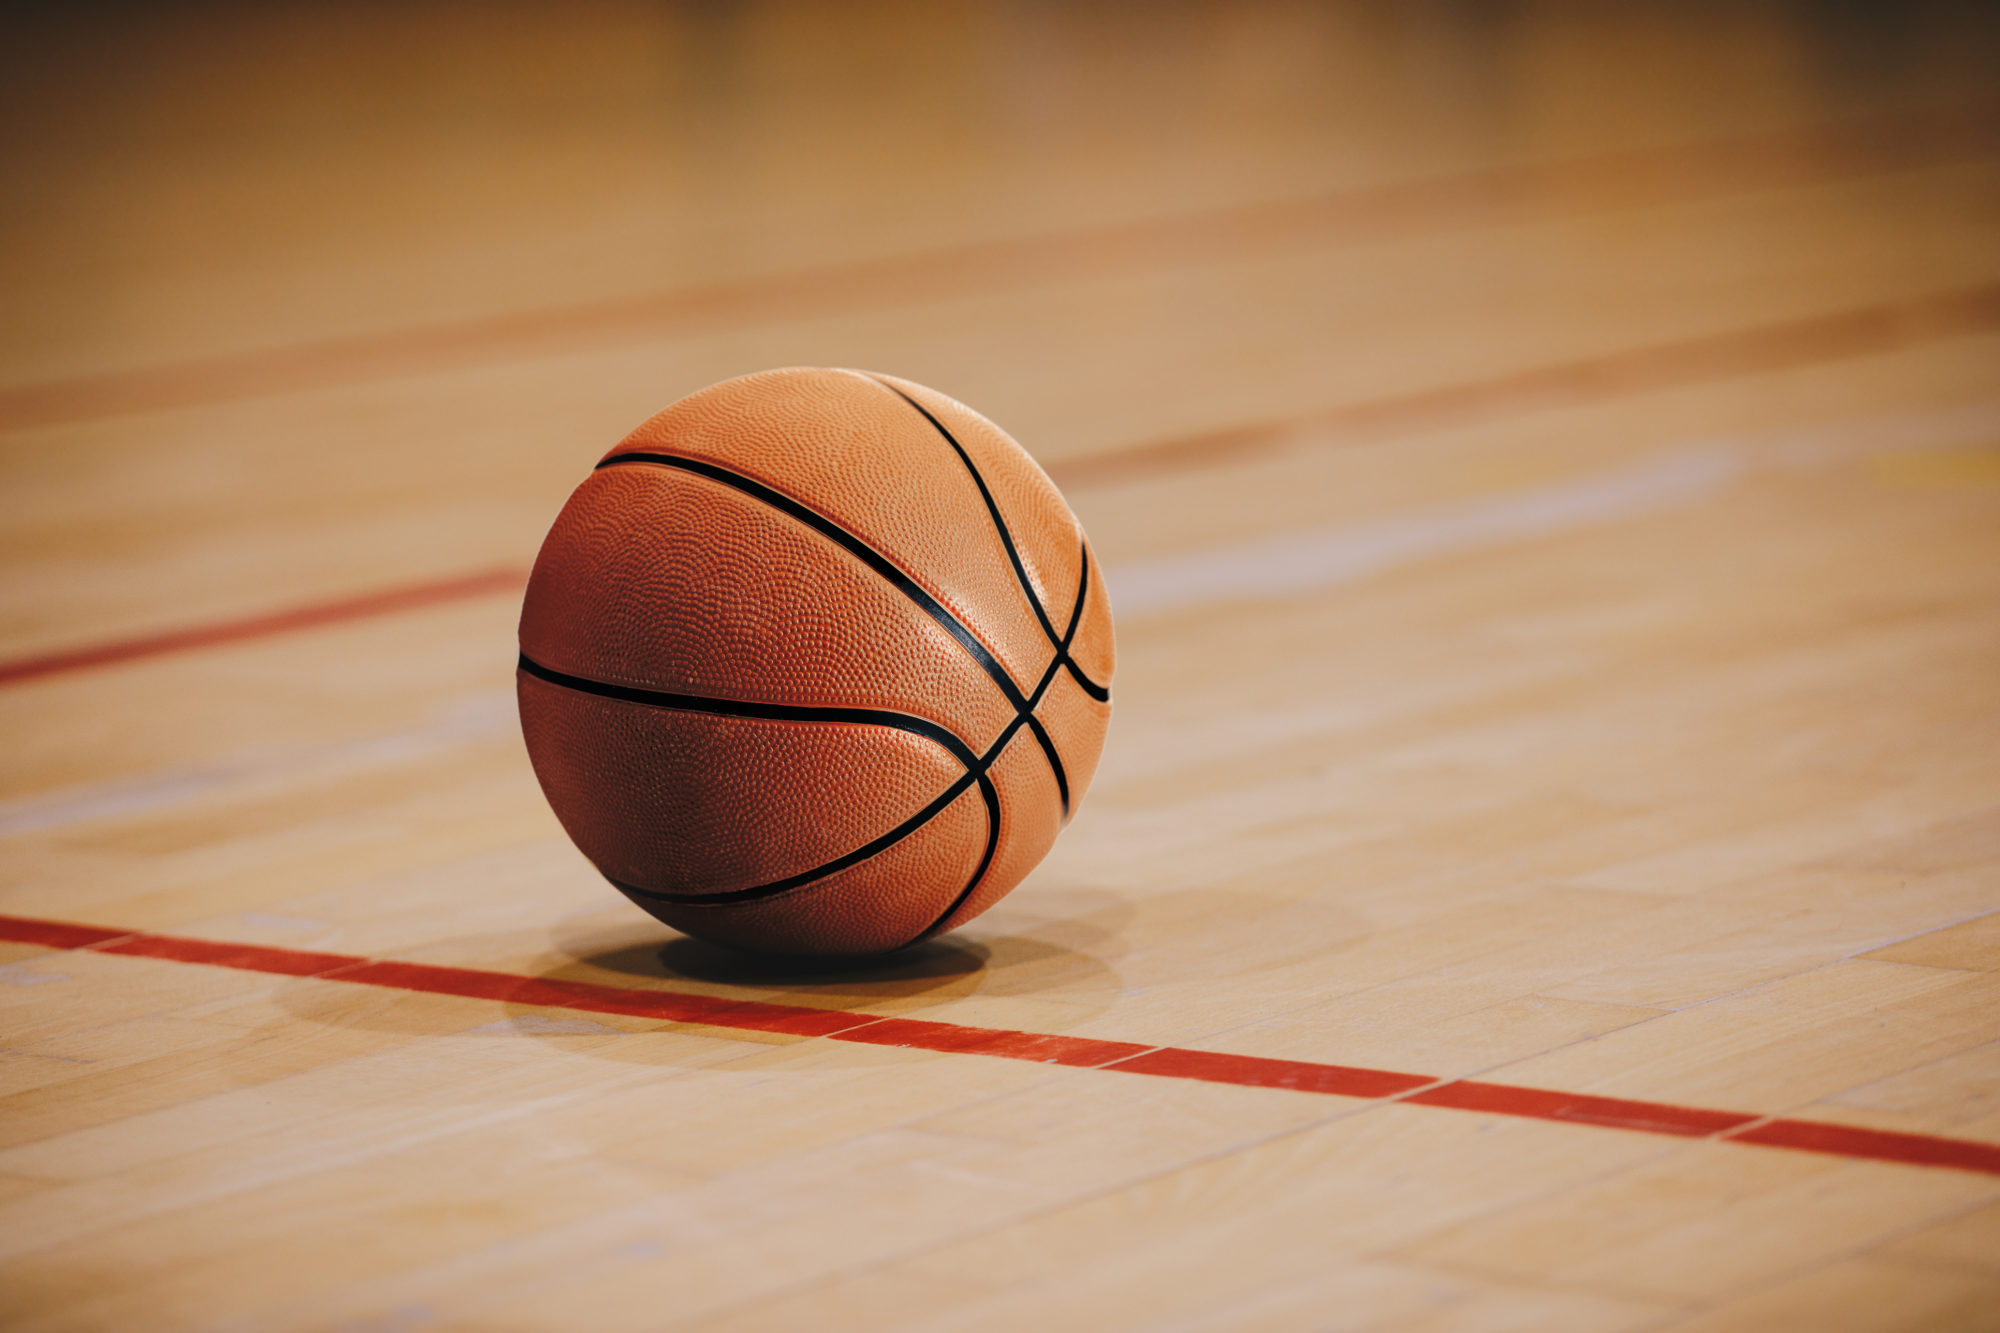 Classic Basketball on Wooden Court Floor Close Up with Blurred Arena in ...